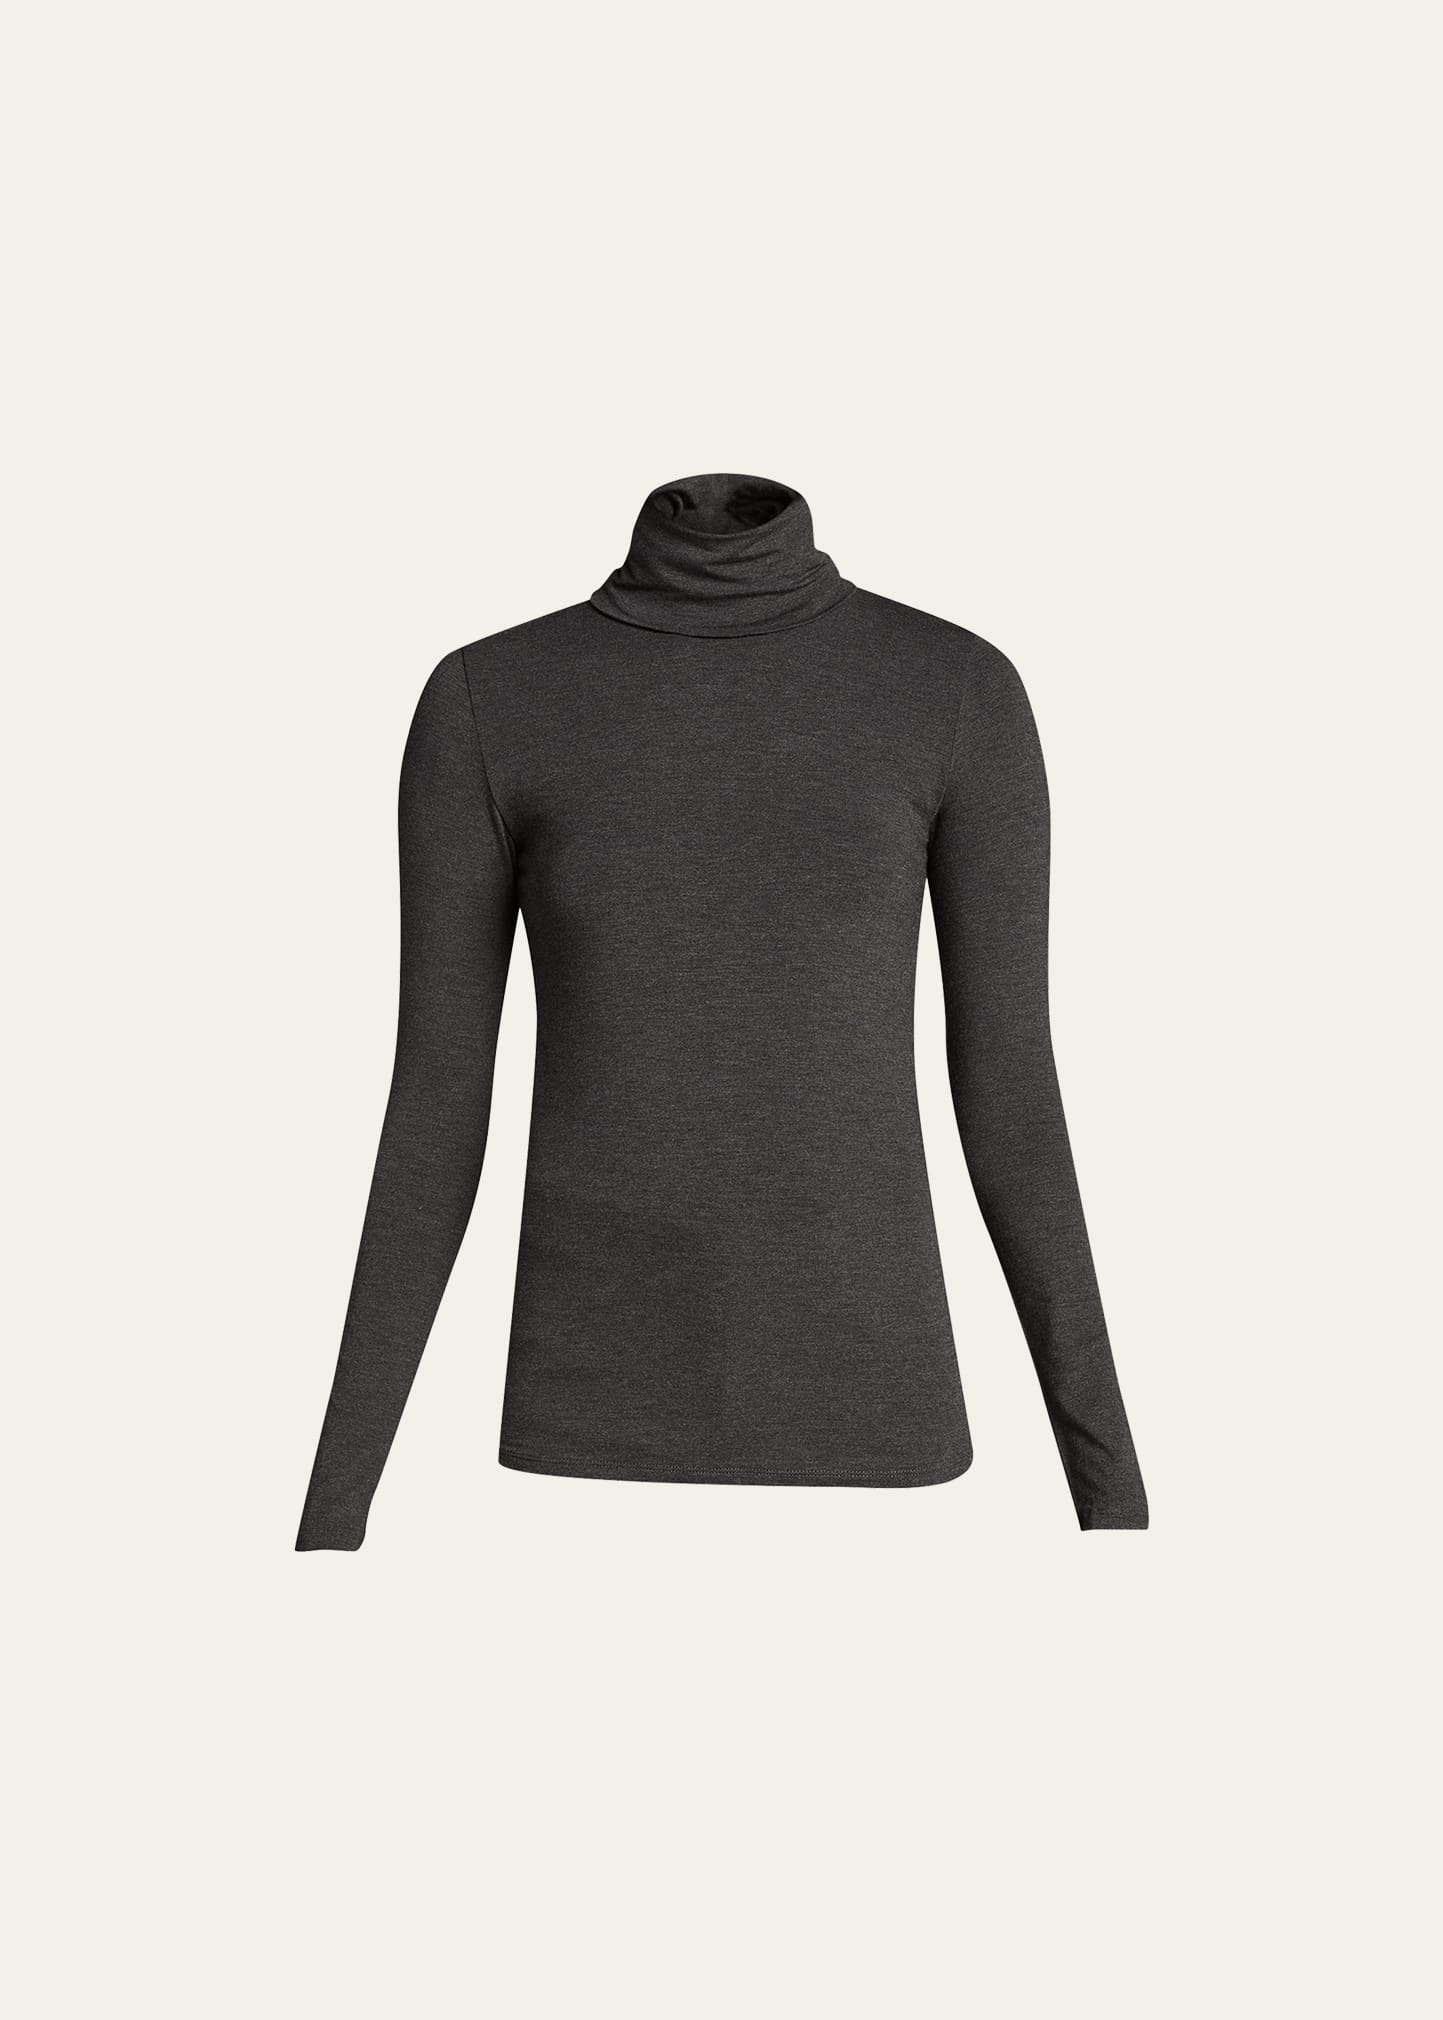 Majestic Viscose Jersey Turtleneck In Charcoal